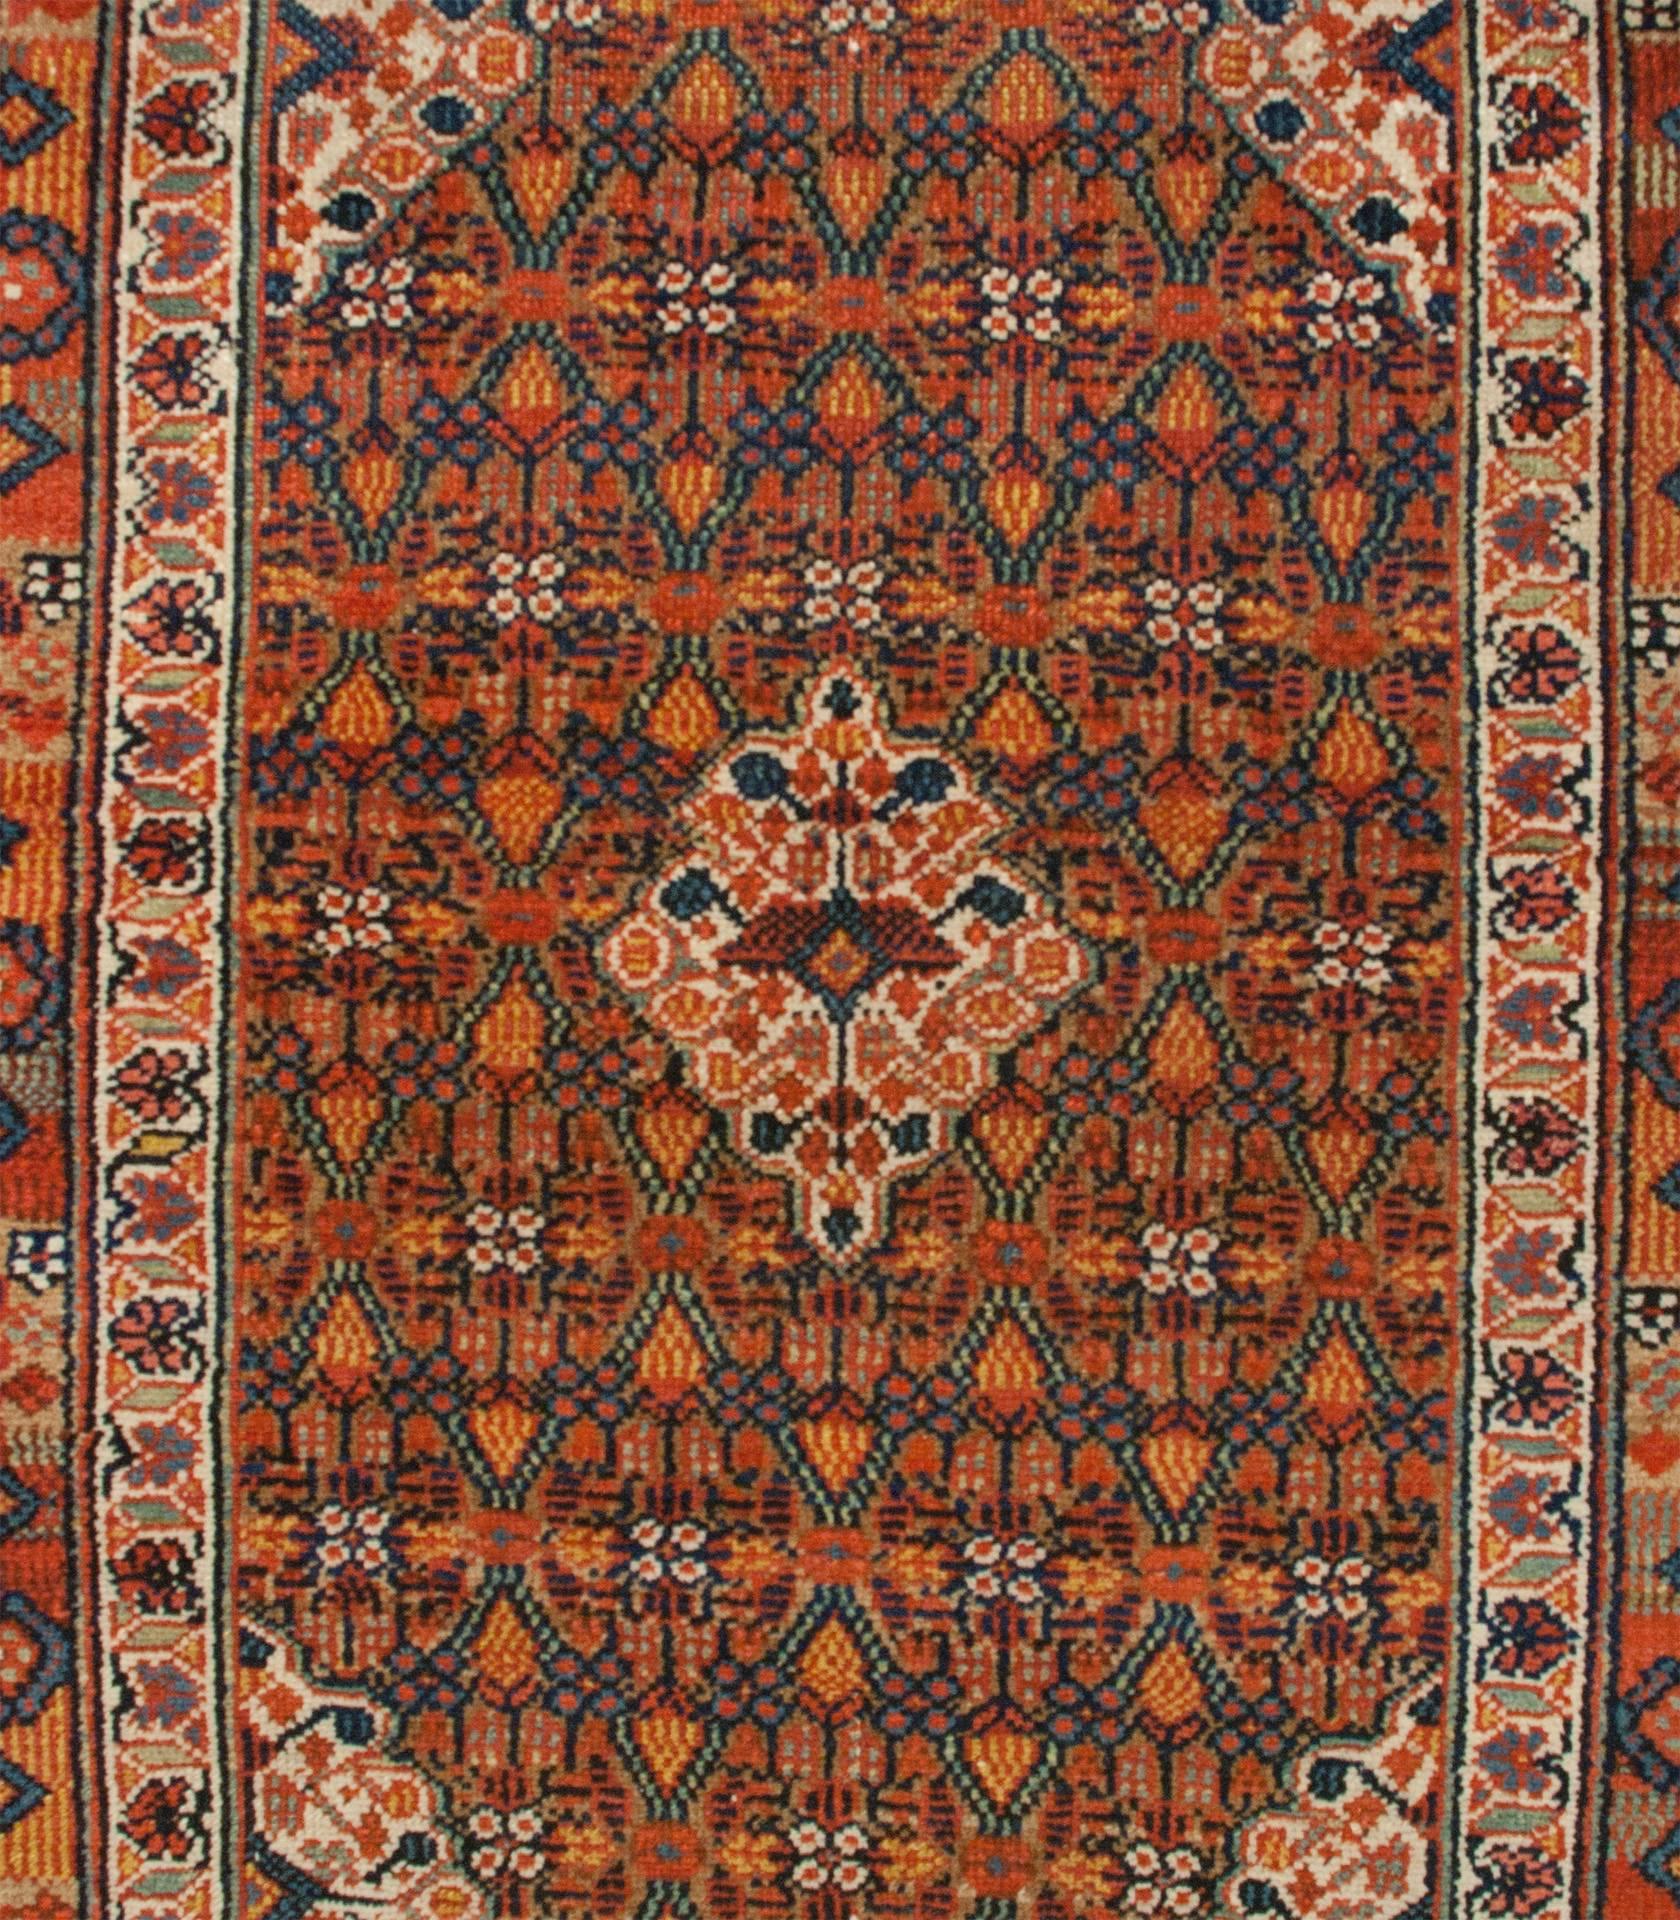 An amazing 19th century Persian Serab camel-hair runner with an intensely woven multicolored lattice field surrounded by a contrasting floral border and another multicolored geometric border, all surrounded by a natural undyed camel-hair border.